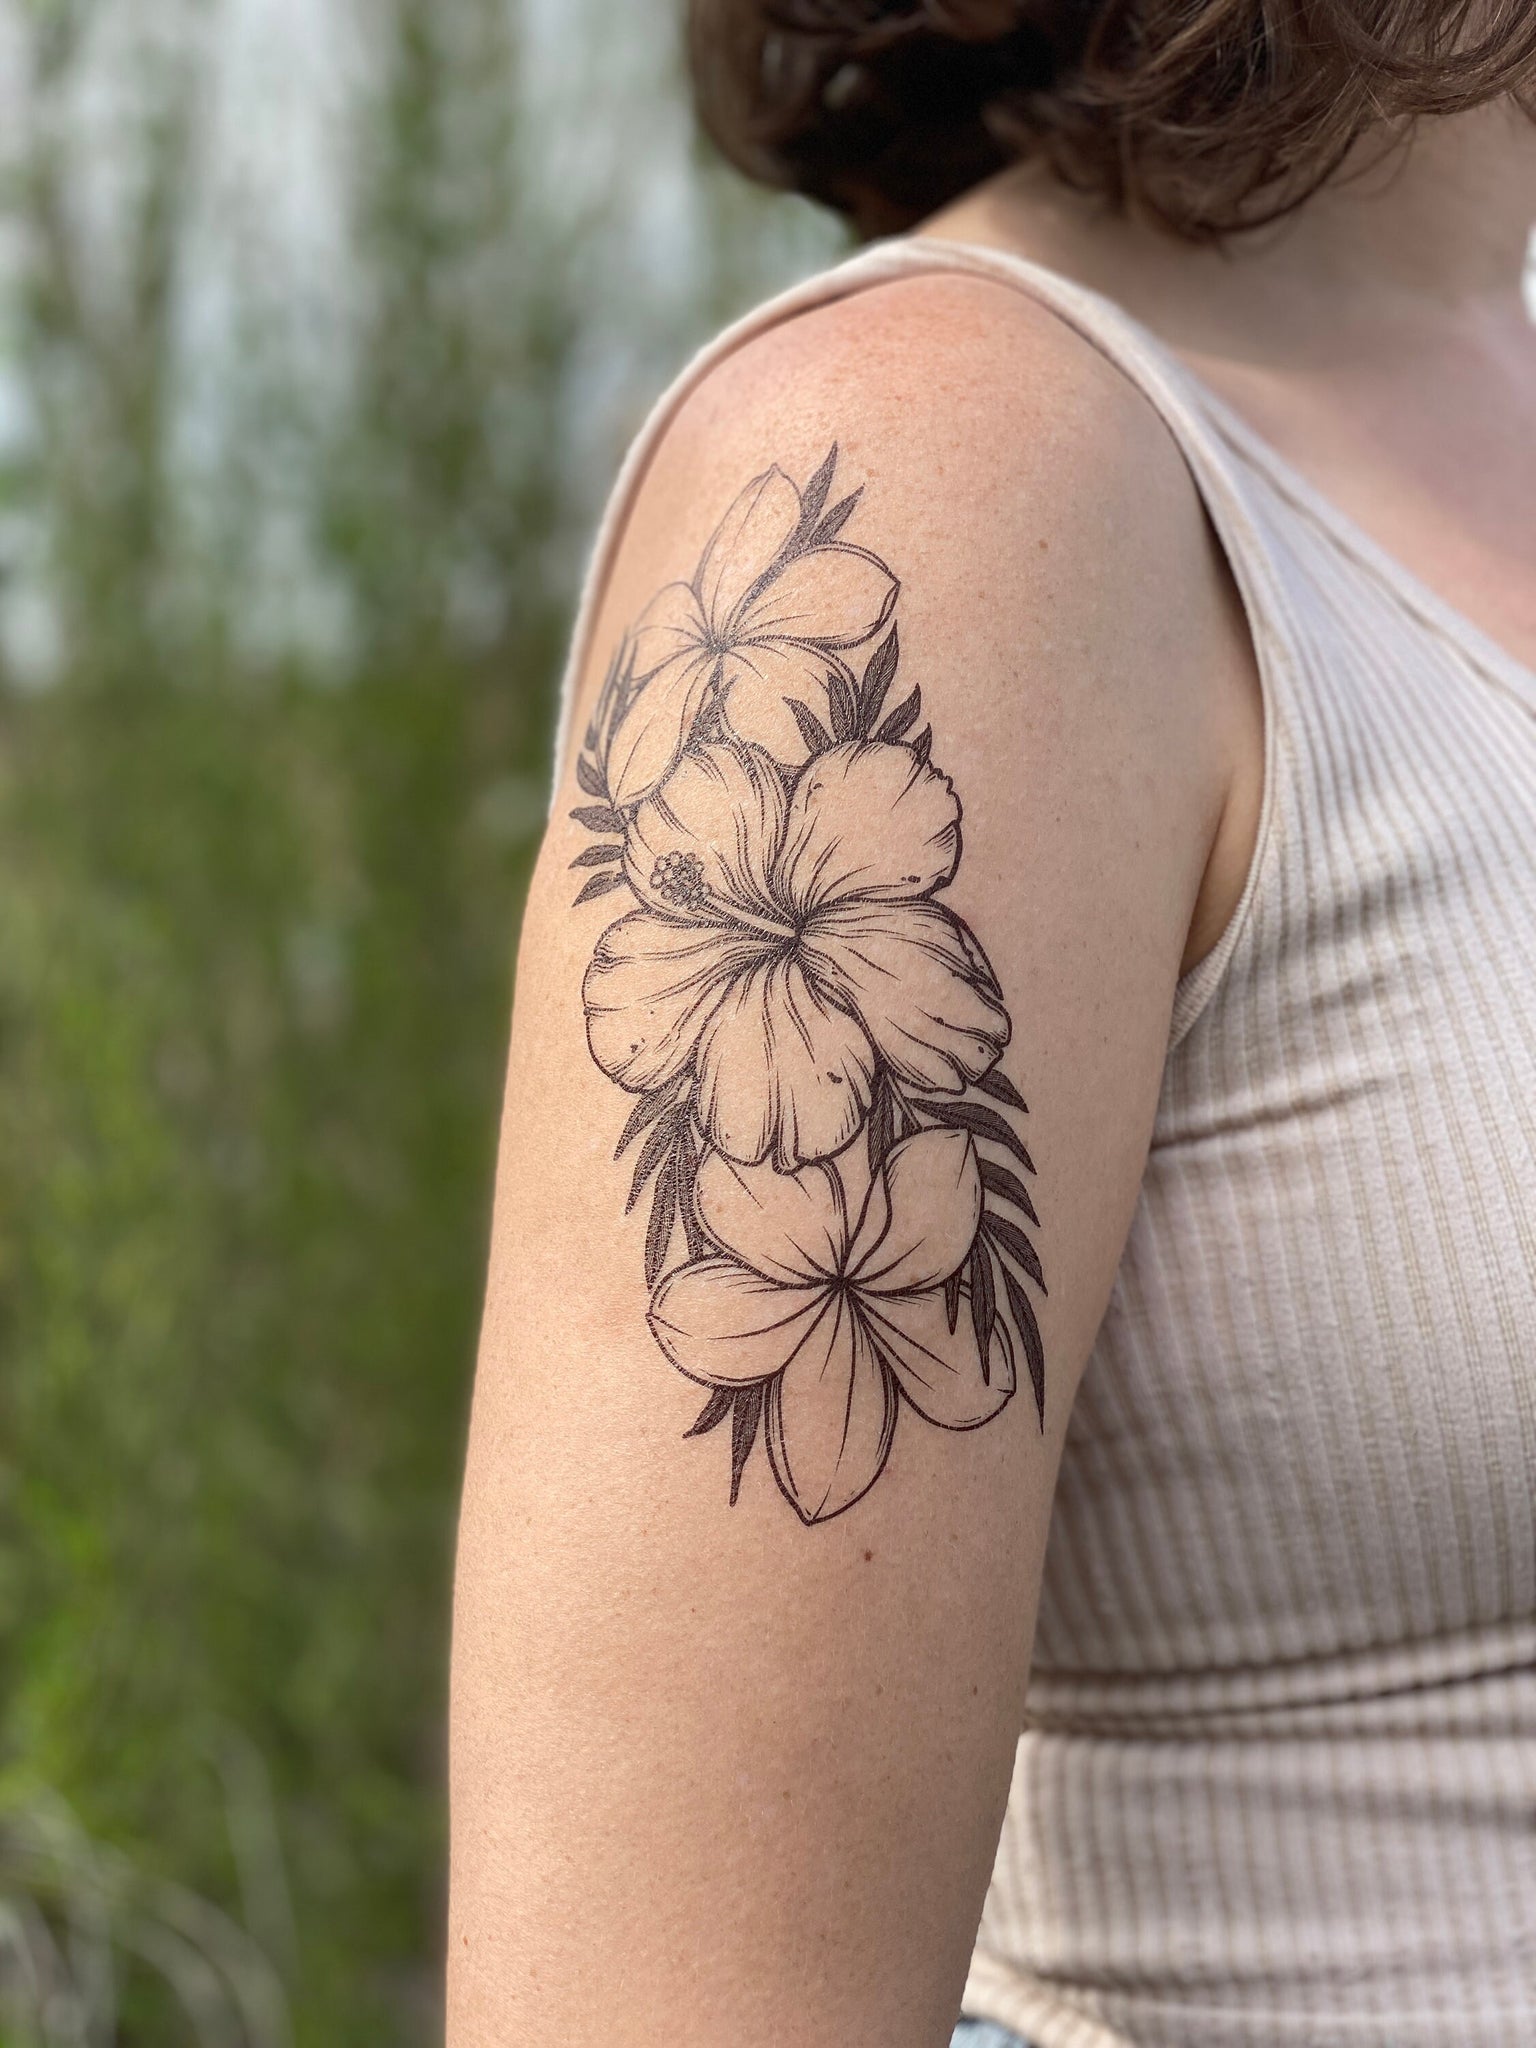 13 Amazing Plumeria Tattoo Design Ideas and Meanings - FMag.com | Tattoos  for daughters, Family tattoos, Mother tattoos